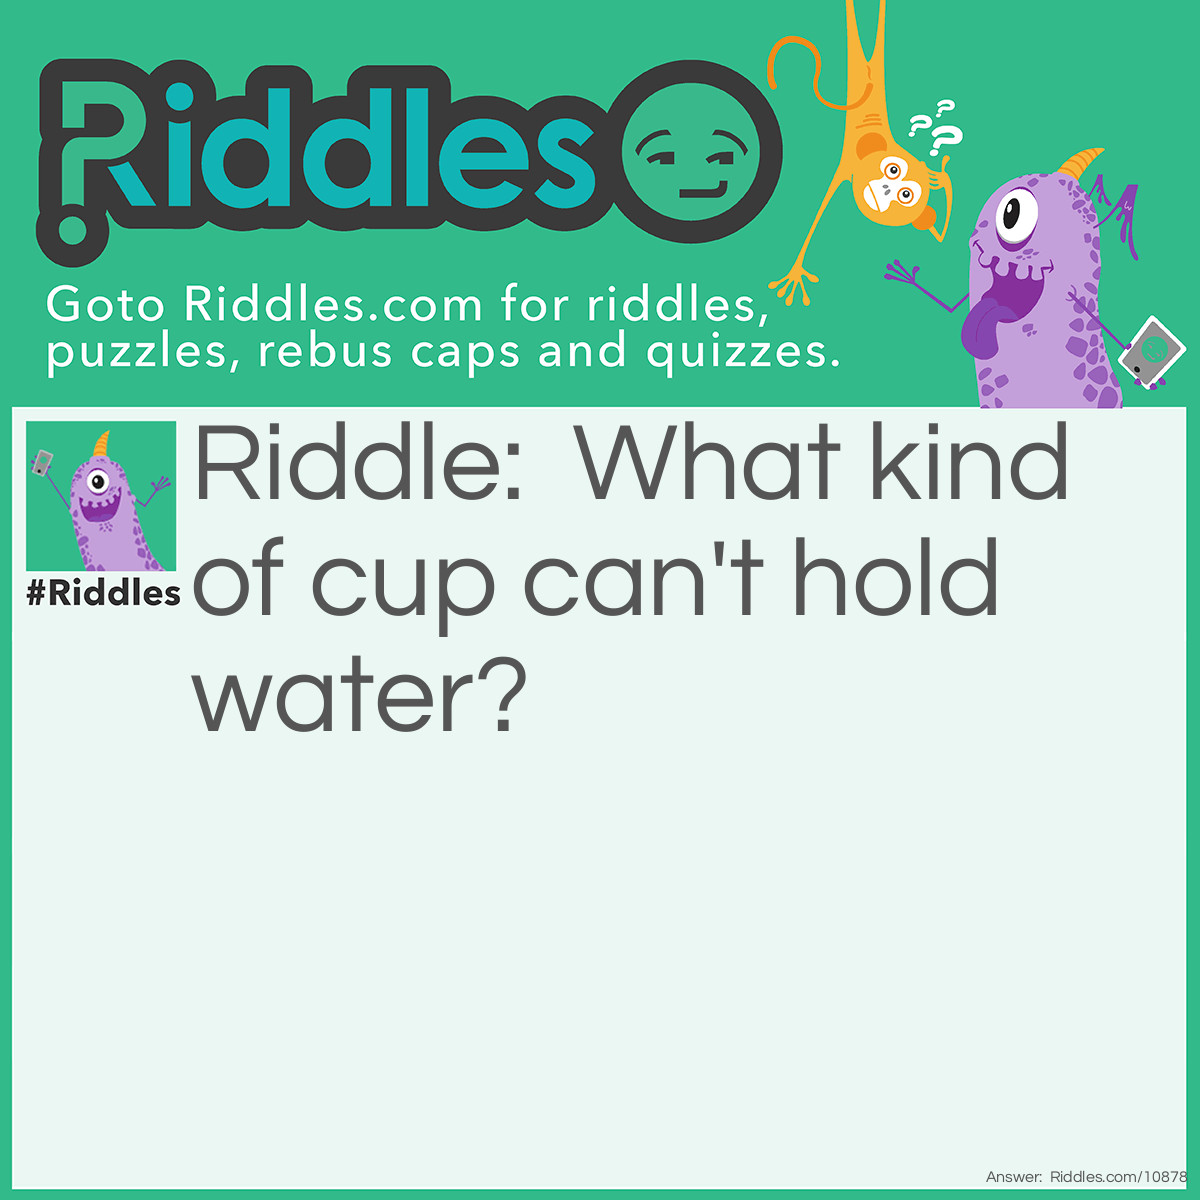 Riddle: What kind of cup can't hold water? Answer: A cupcake.